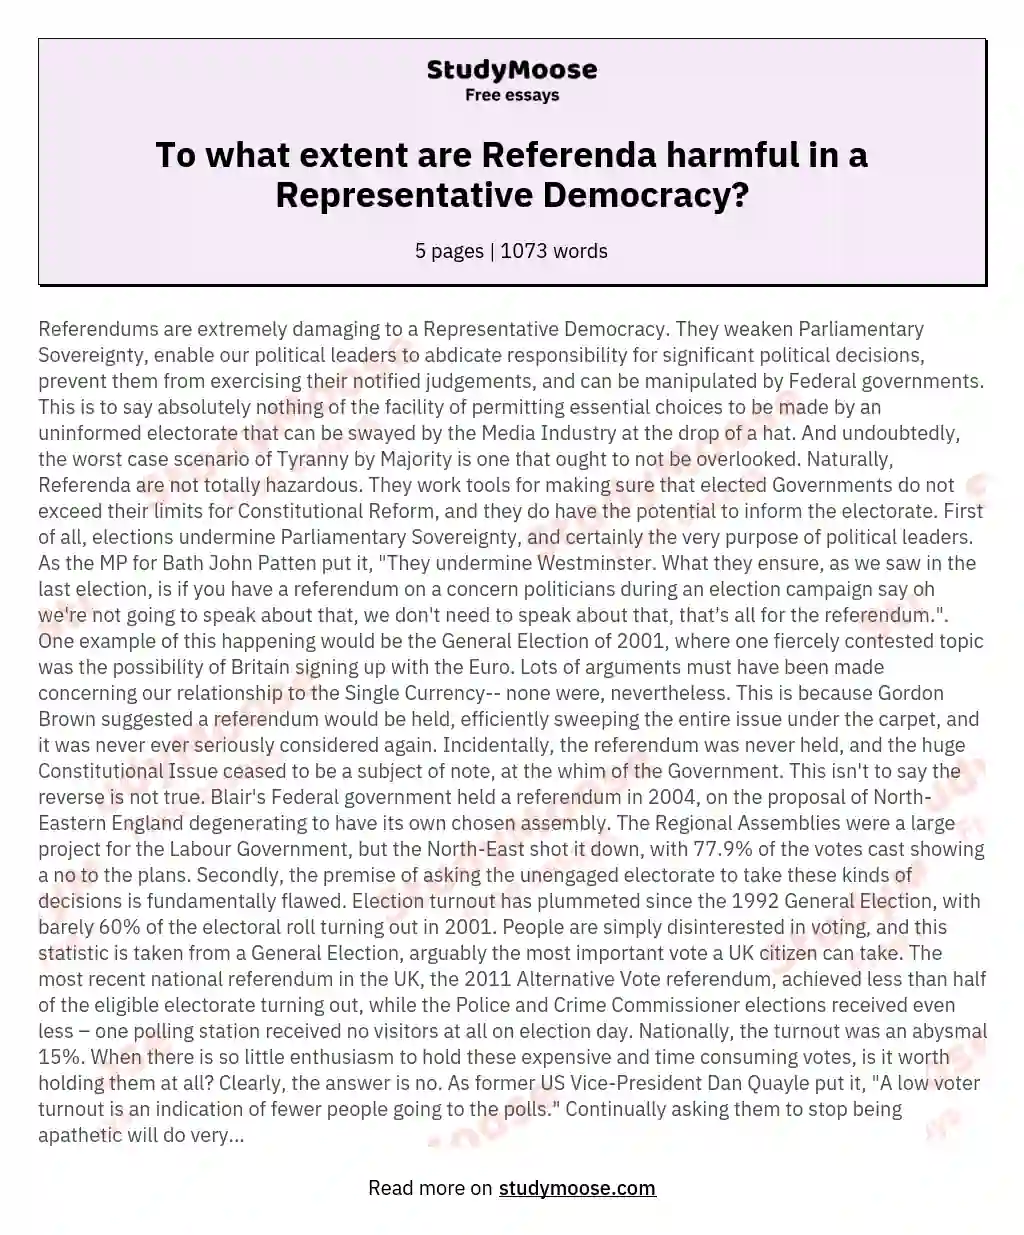 To what extent are Referenda harmful in a Representative Democracy?